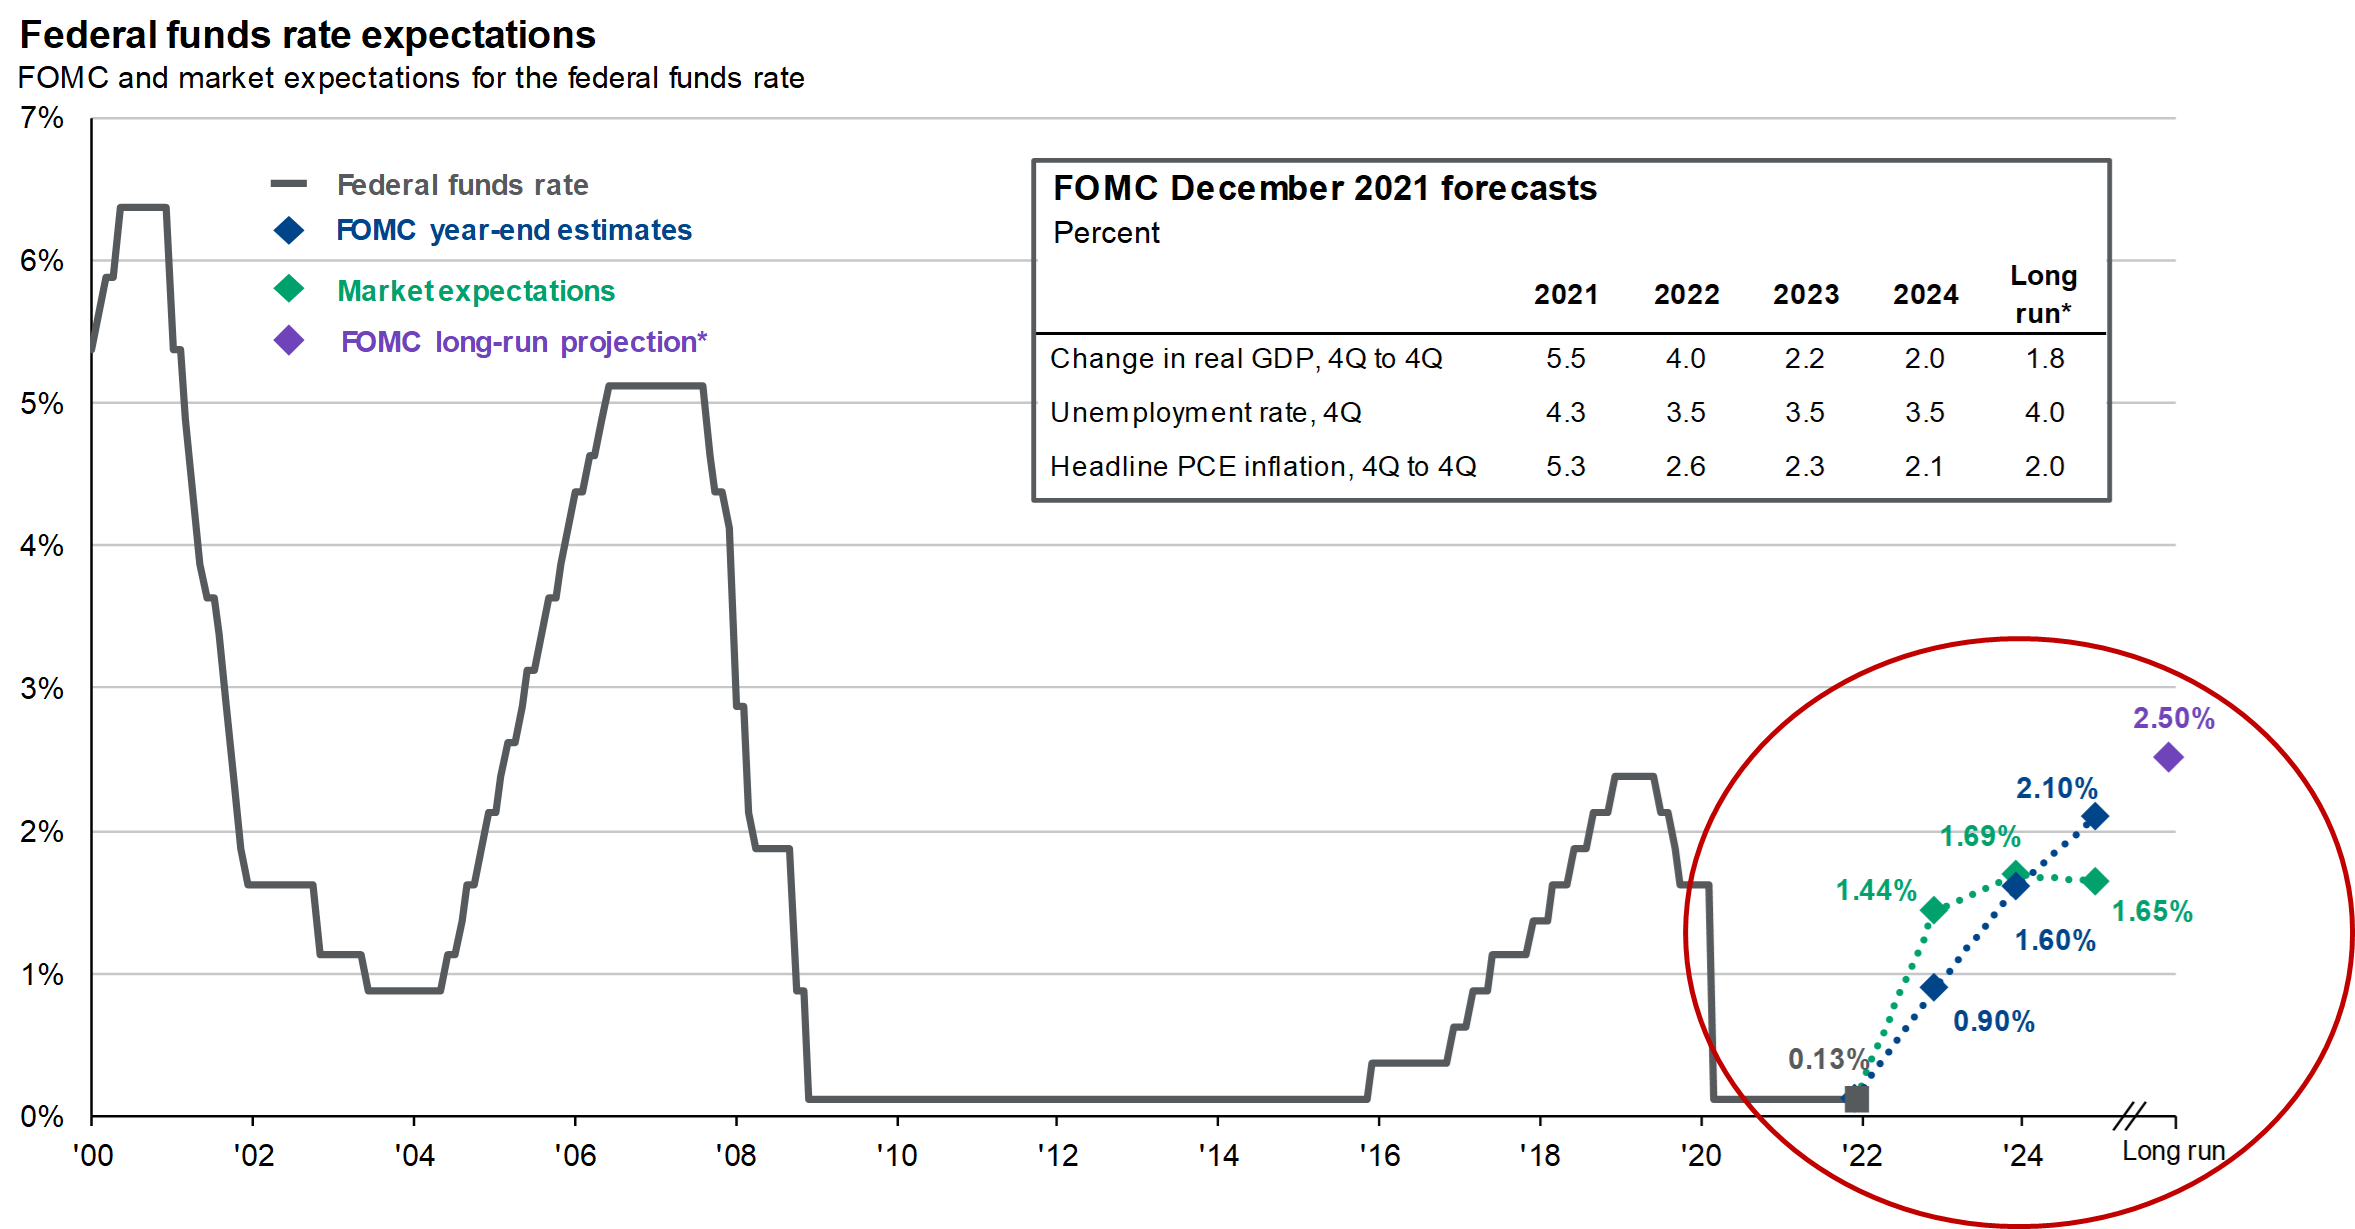 Line graph depicting Federal funds rate expectations